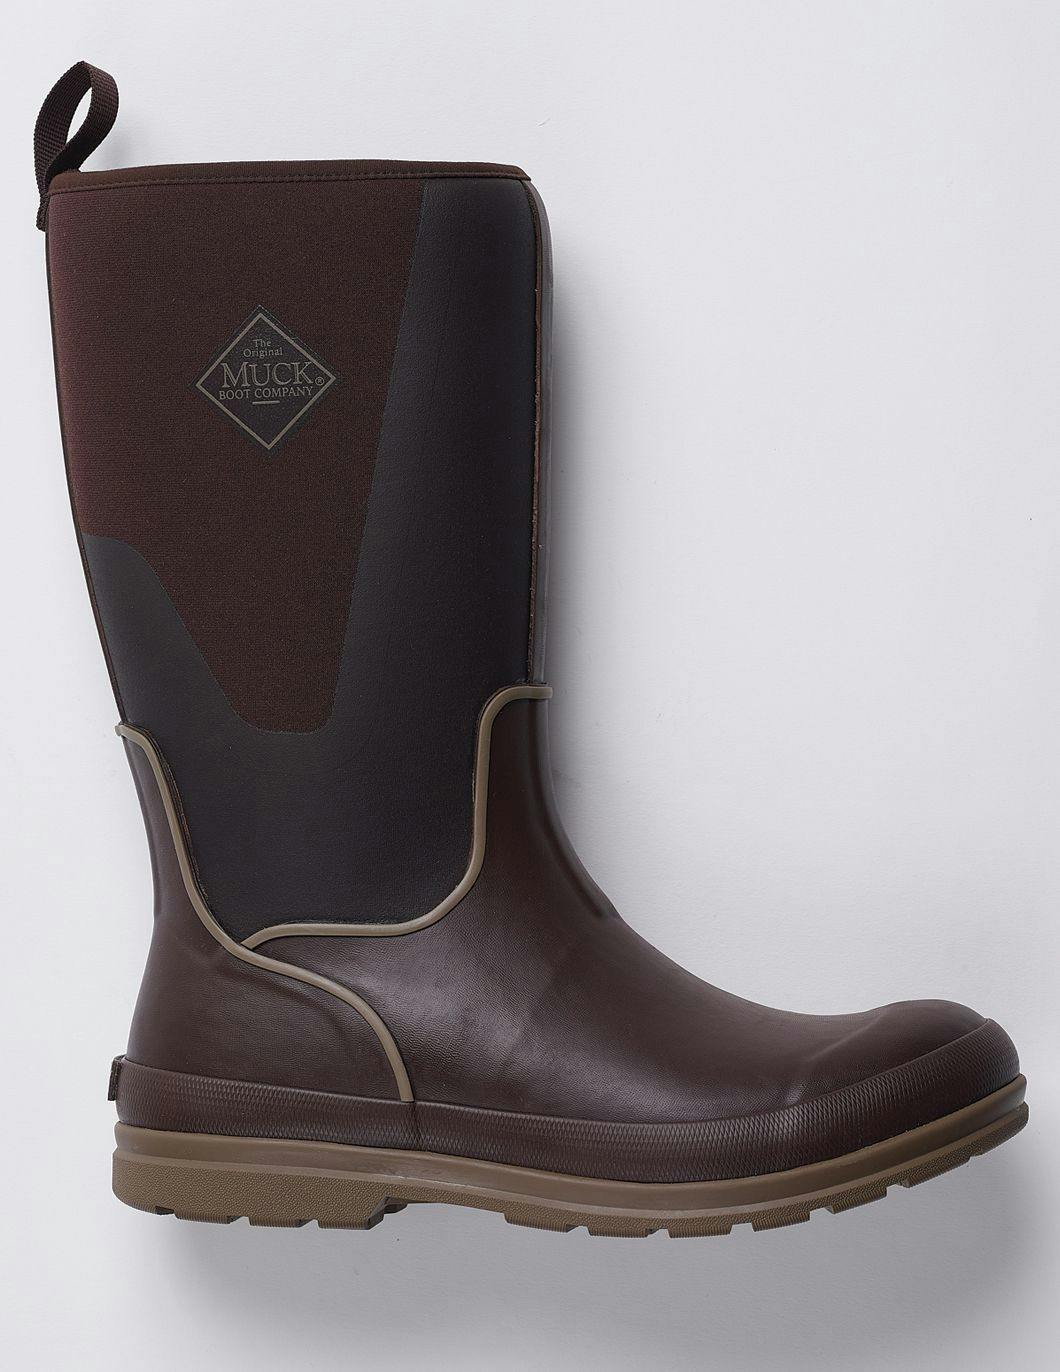 muck-womens-tall-boot-brown-side